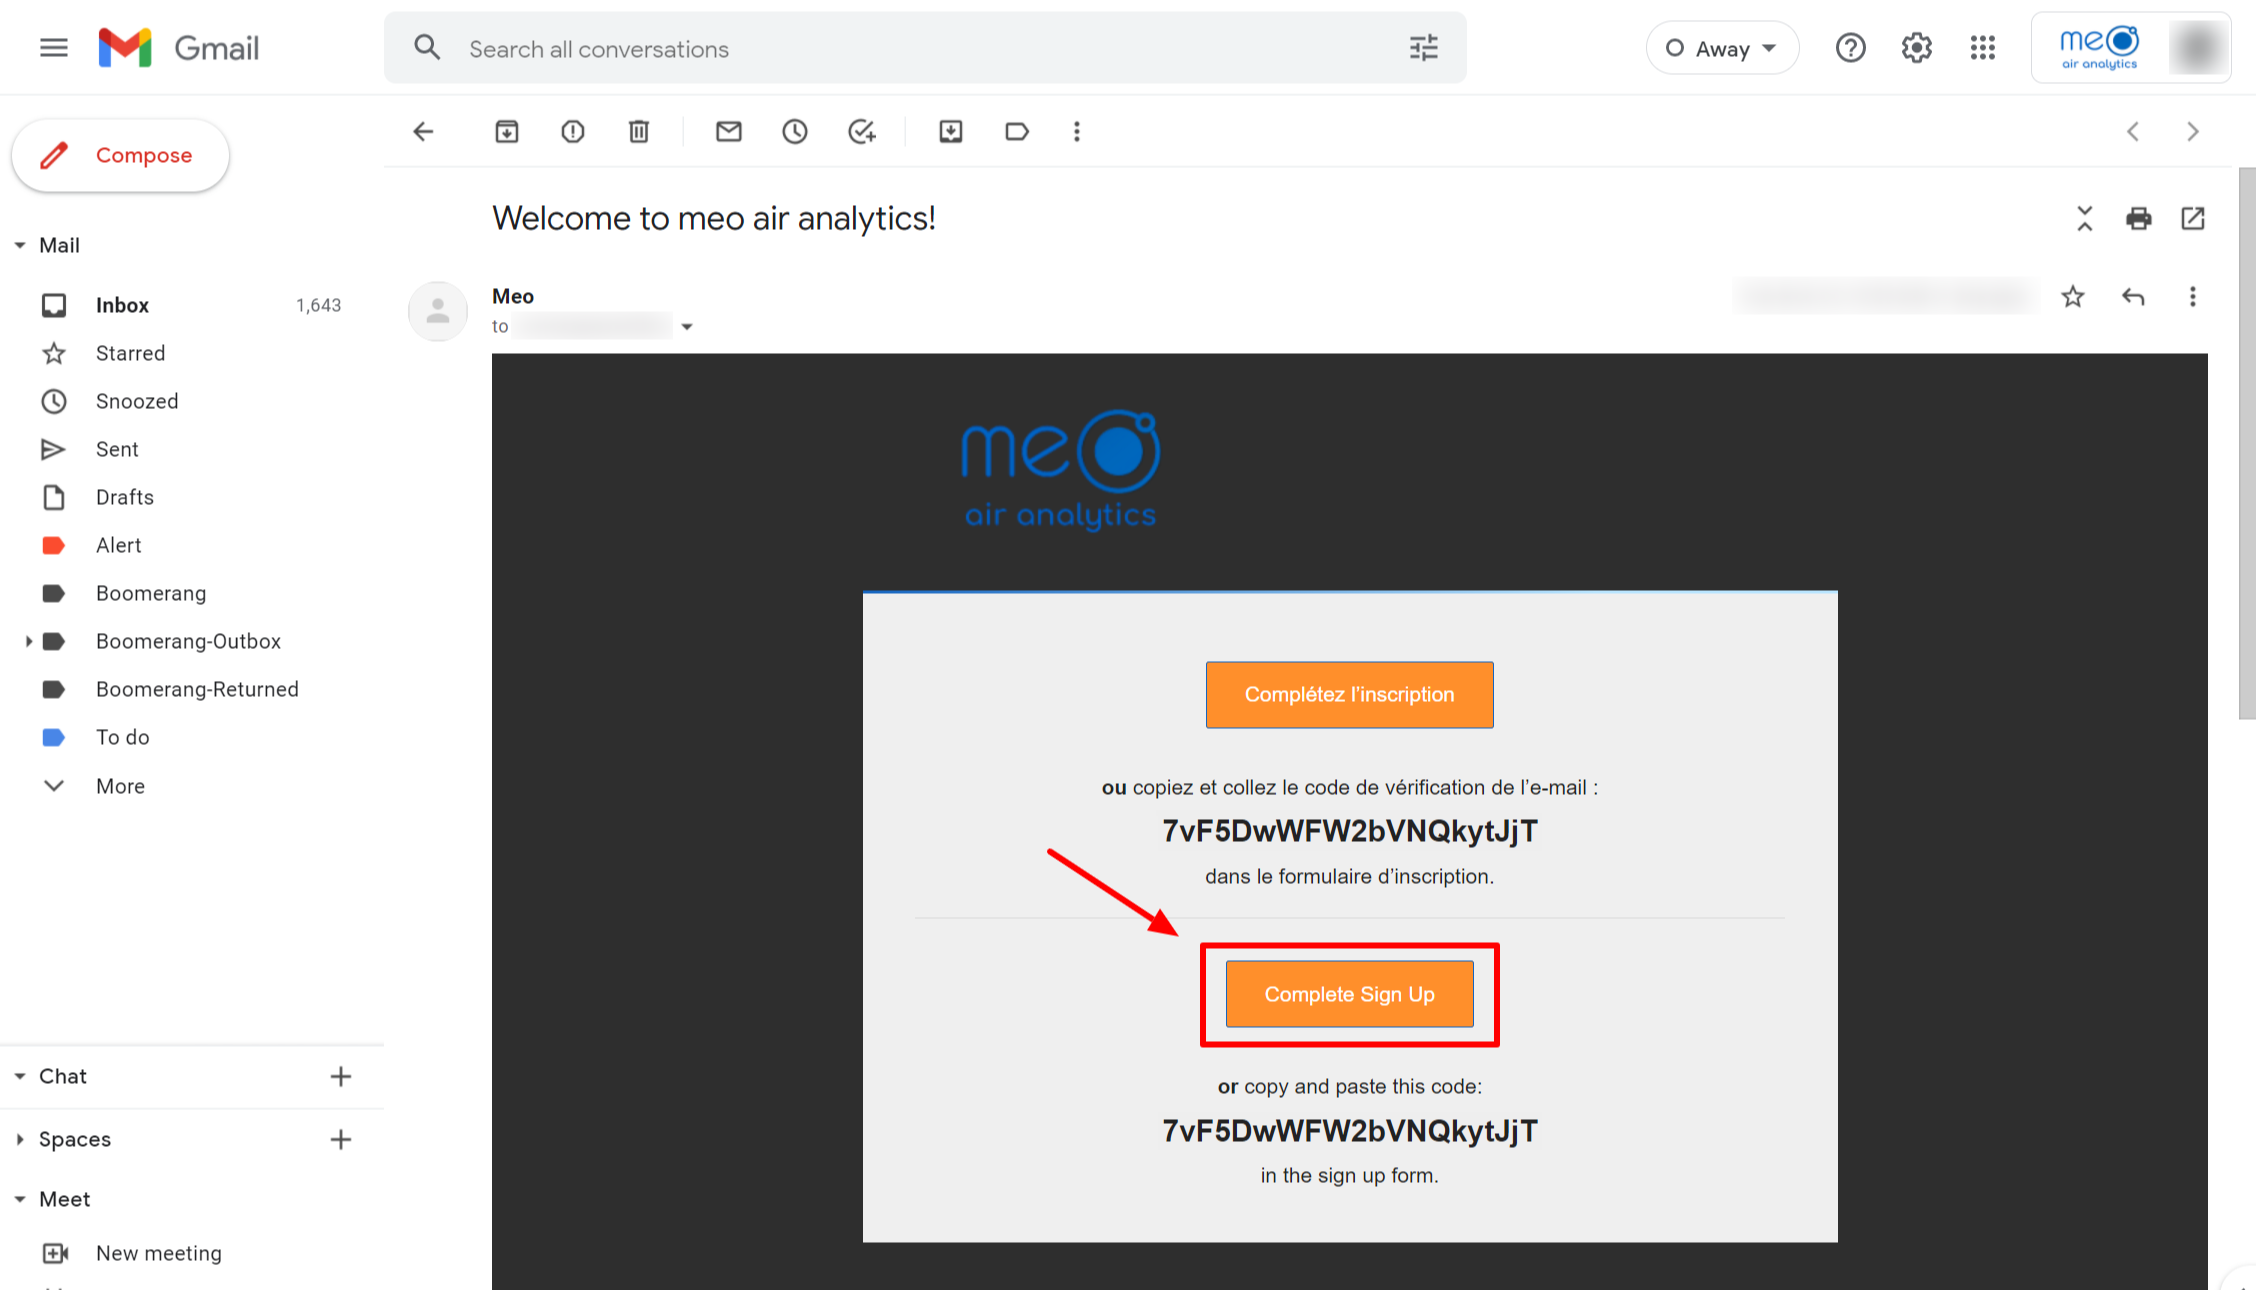 Check new email from meo, and click on “Complete Sign Up”